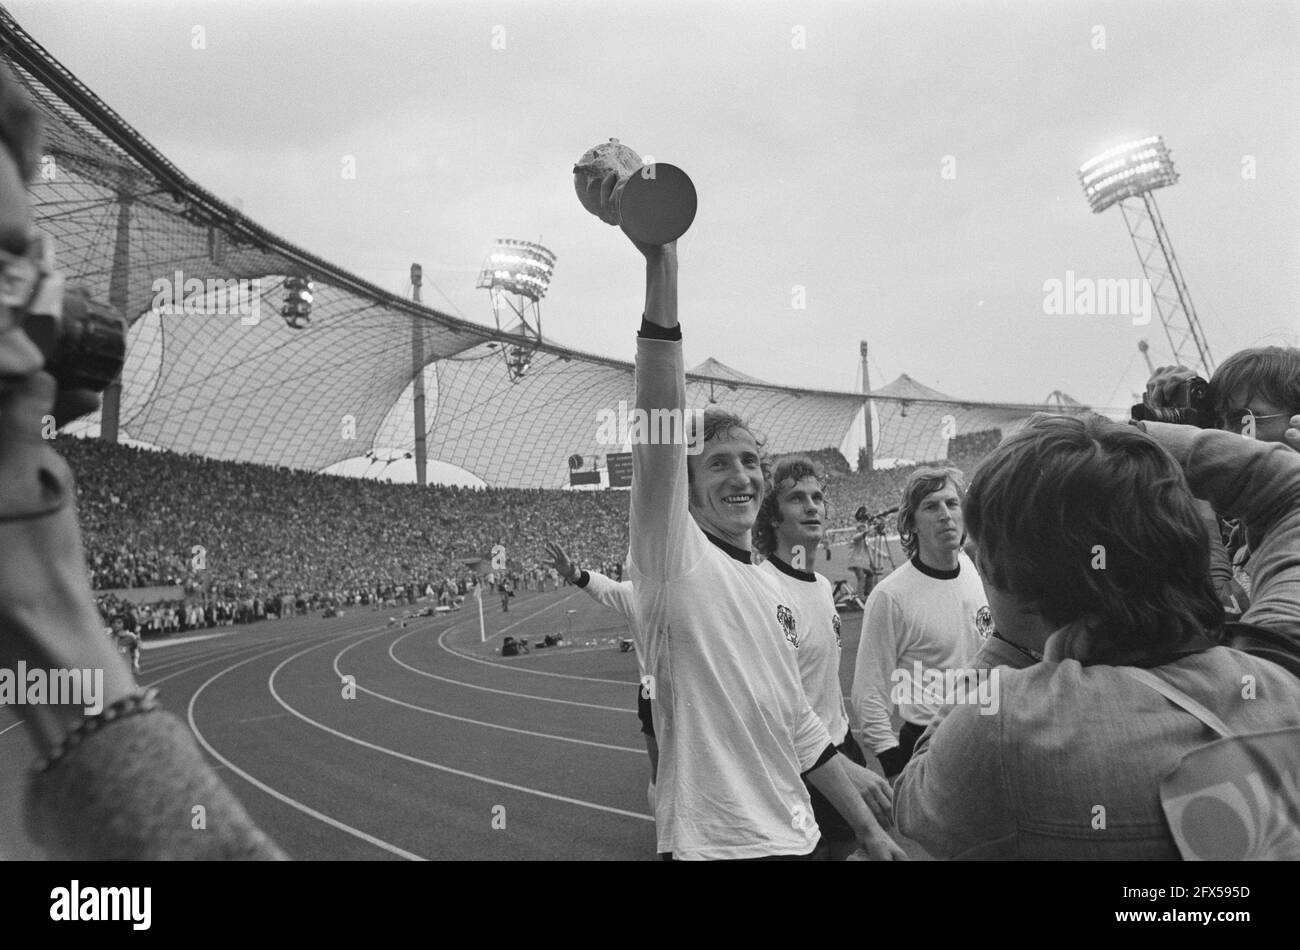 Final World Cup 1974 in Munich, West Germany v Netherlands 2-1; German players with the World Cup, July 7, 1974, finals, sports, soccer, world championships, The Netherlands, 20th century press agency photo, news to remember, documentary, historic photography 1945-1990, visual stories, human history of the Twentieth Century, capturing moments in time Stock Photo